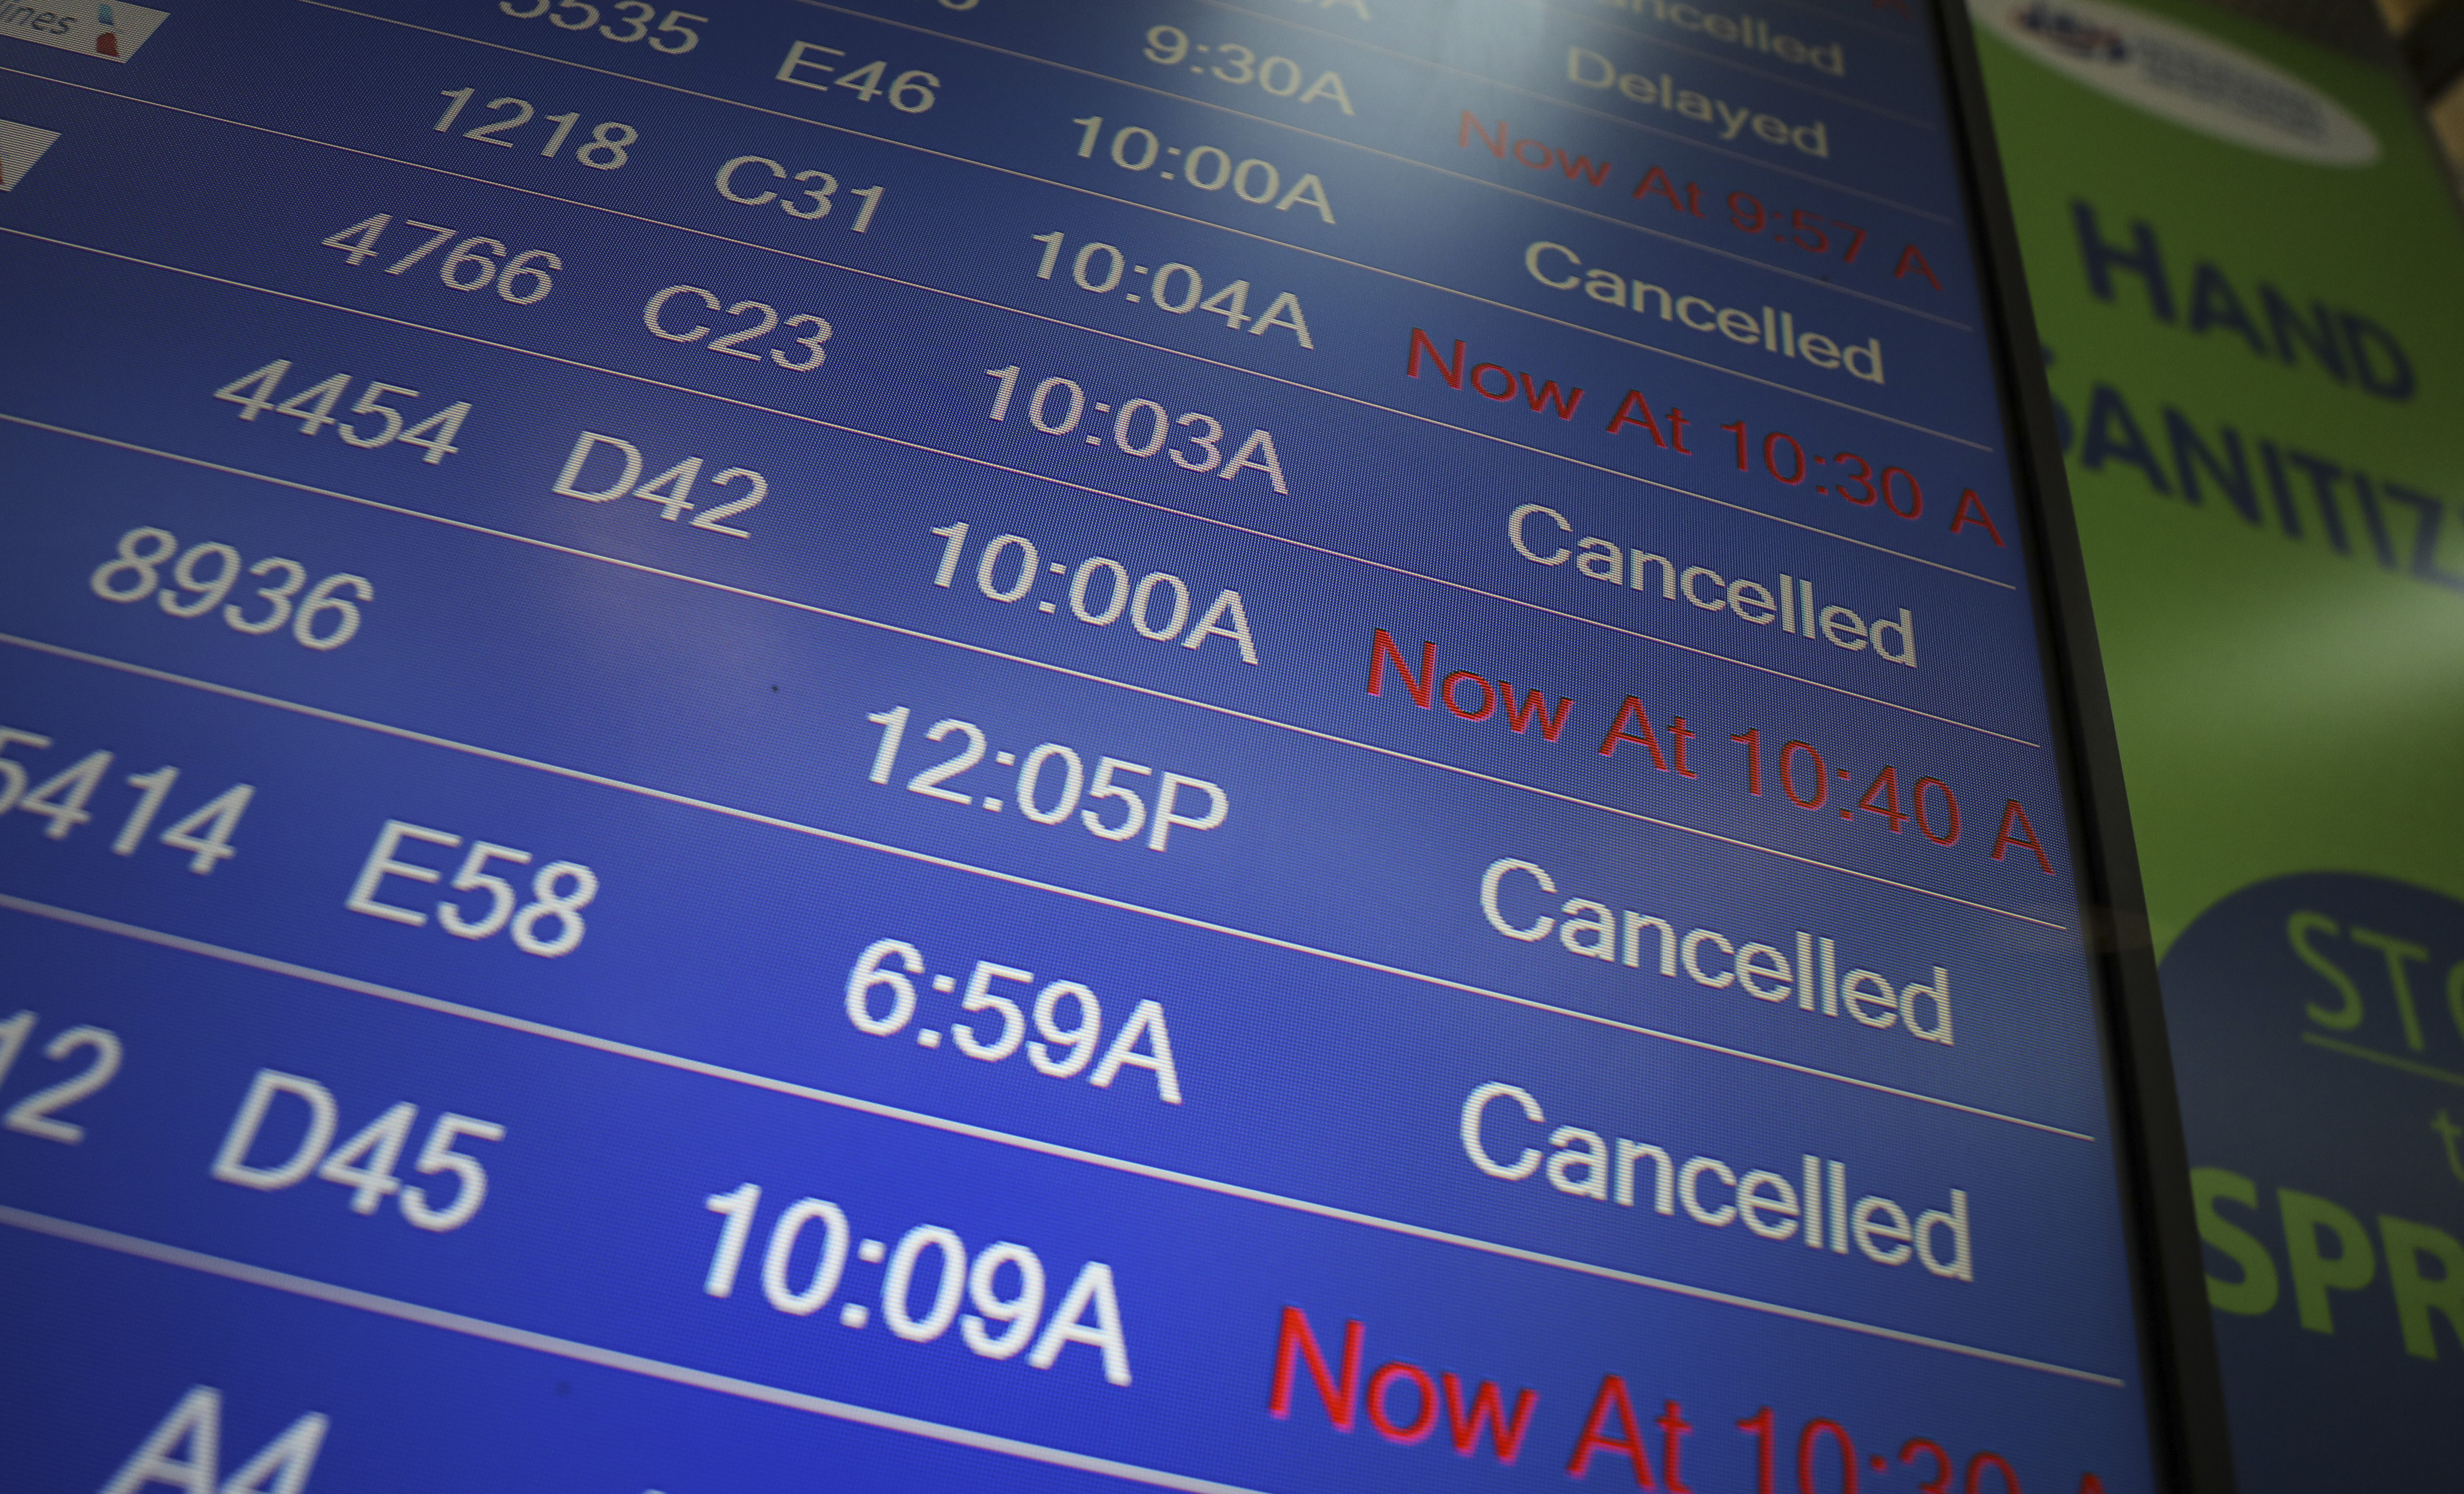 The FAA grounded all US flights because contractors mistakenly deleted files